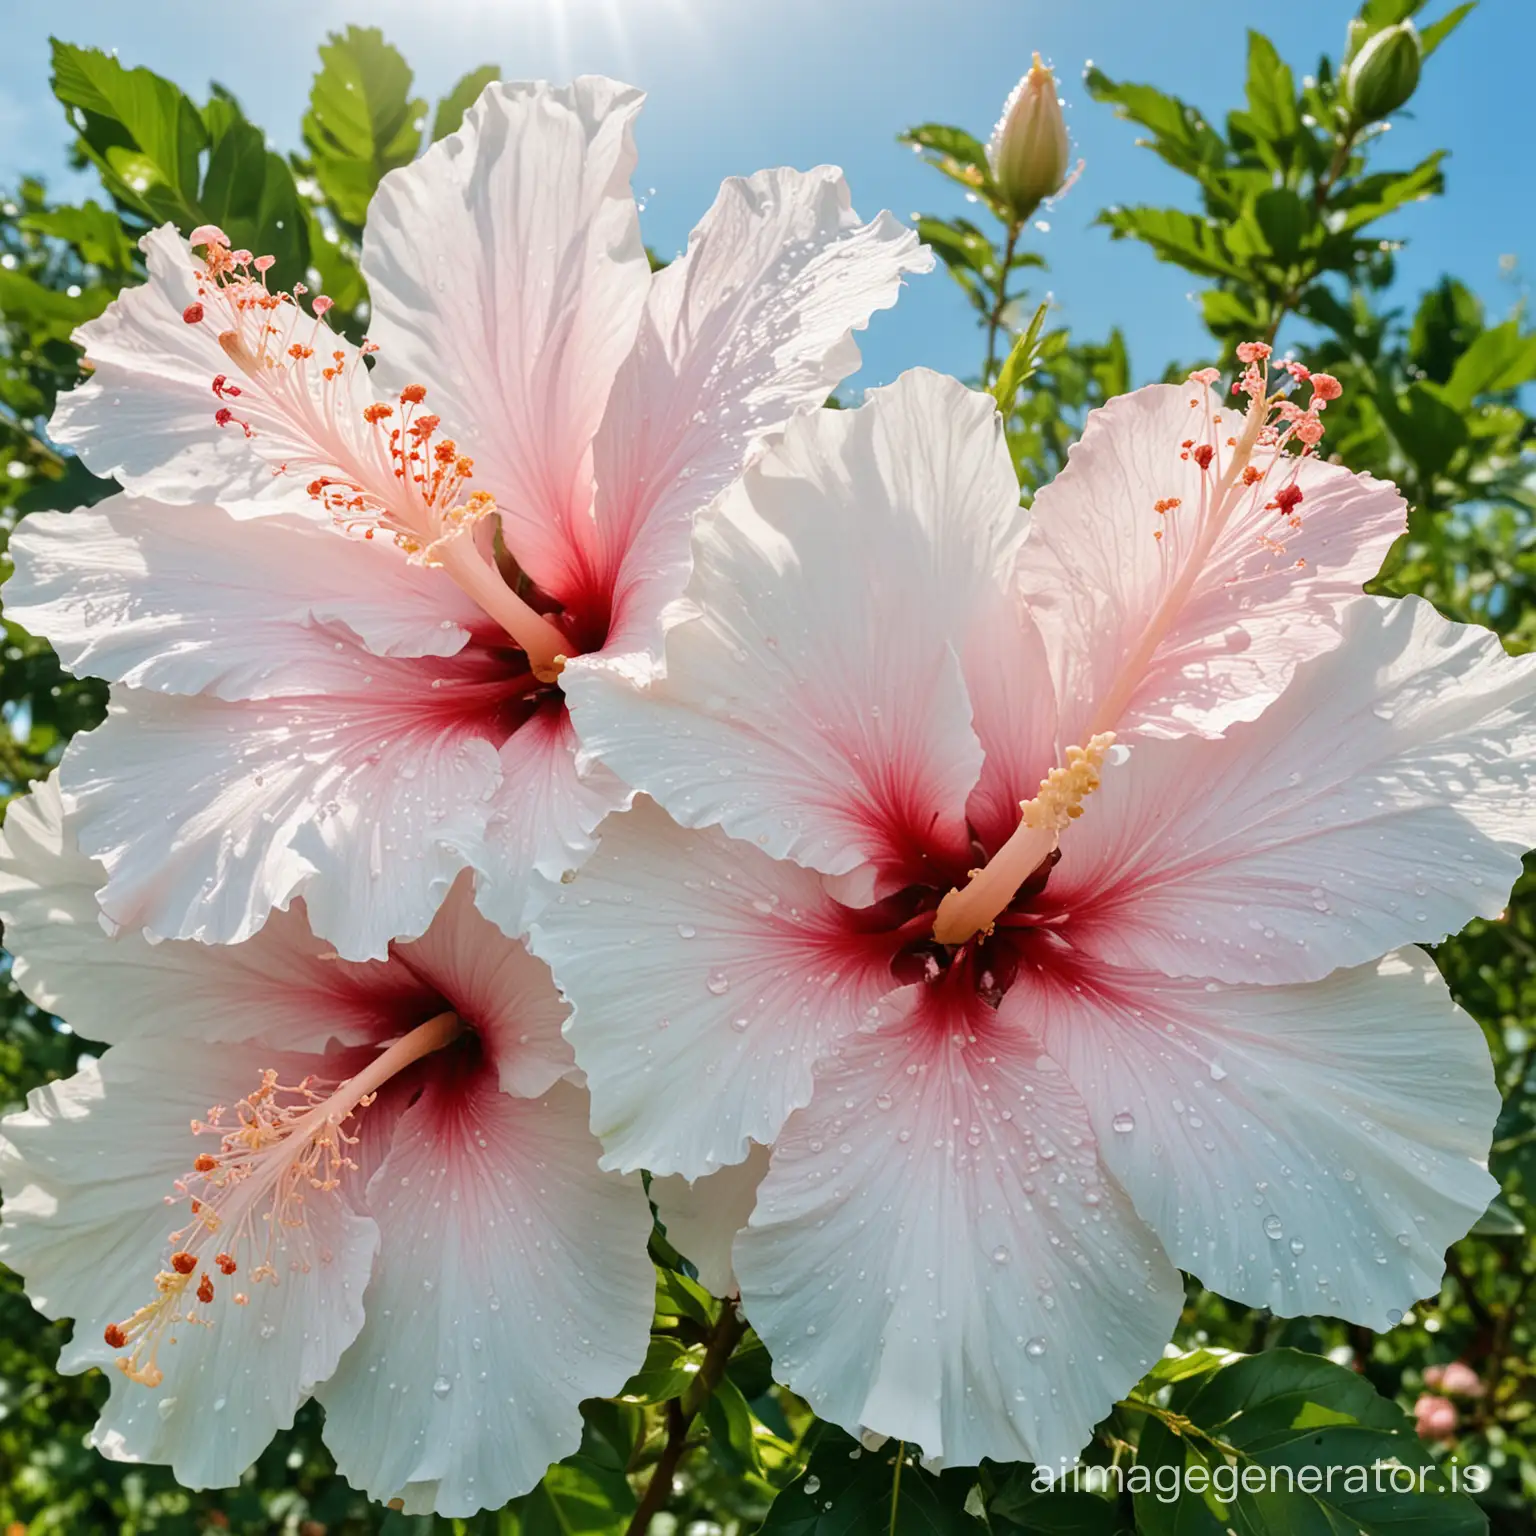 Delicate-Hibiscus-Blooms-with-Pink-Streaks-and-Water-Droplets-on-Lush-Green-Foliage-Background